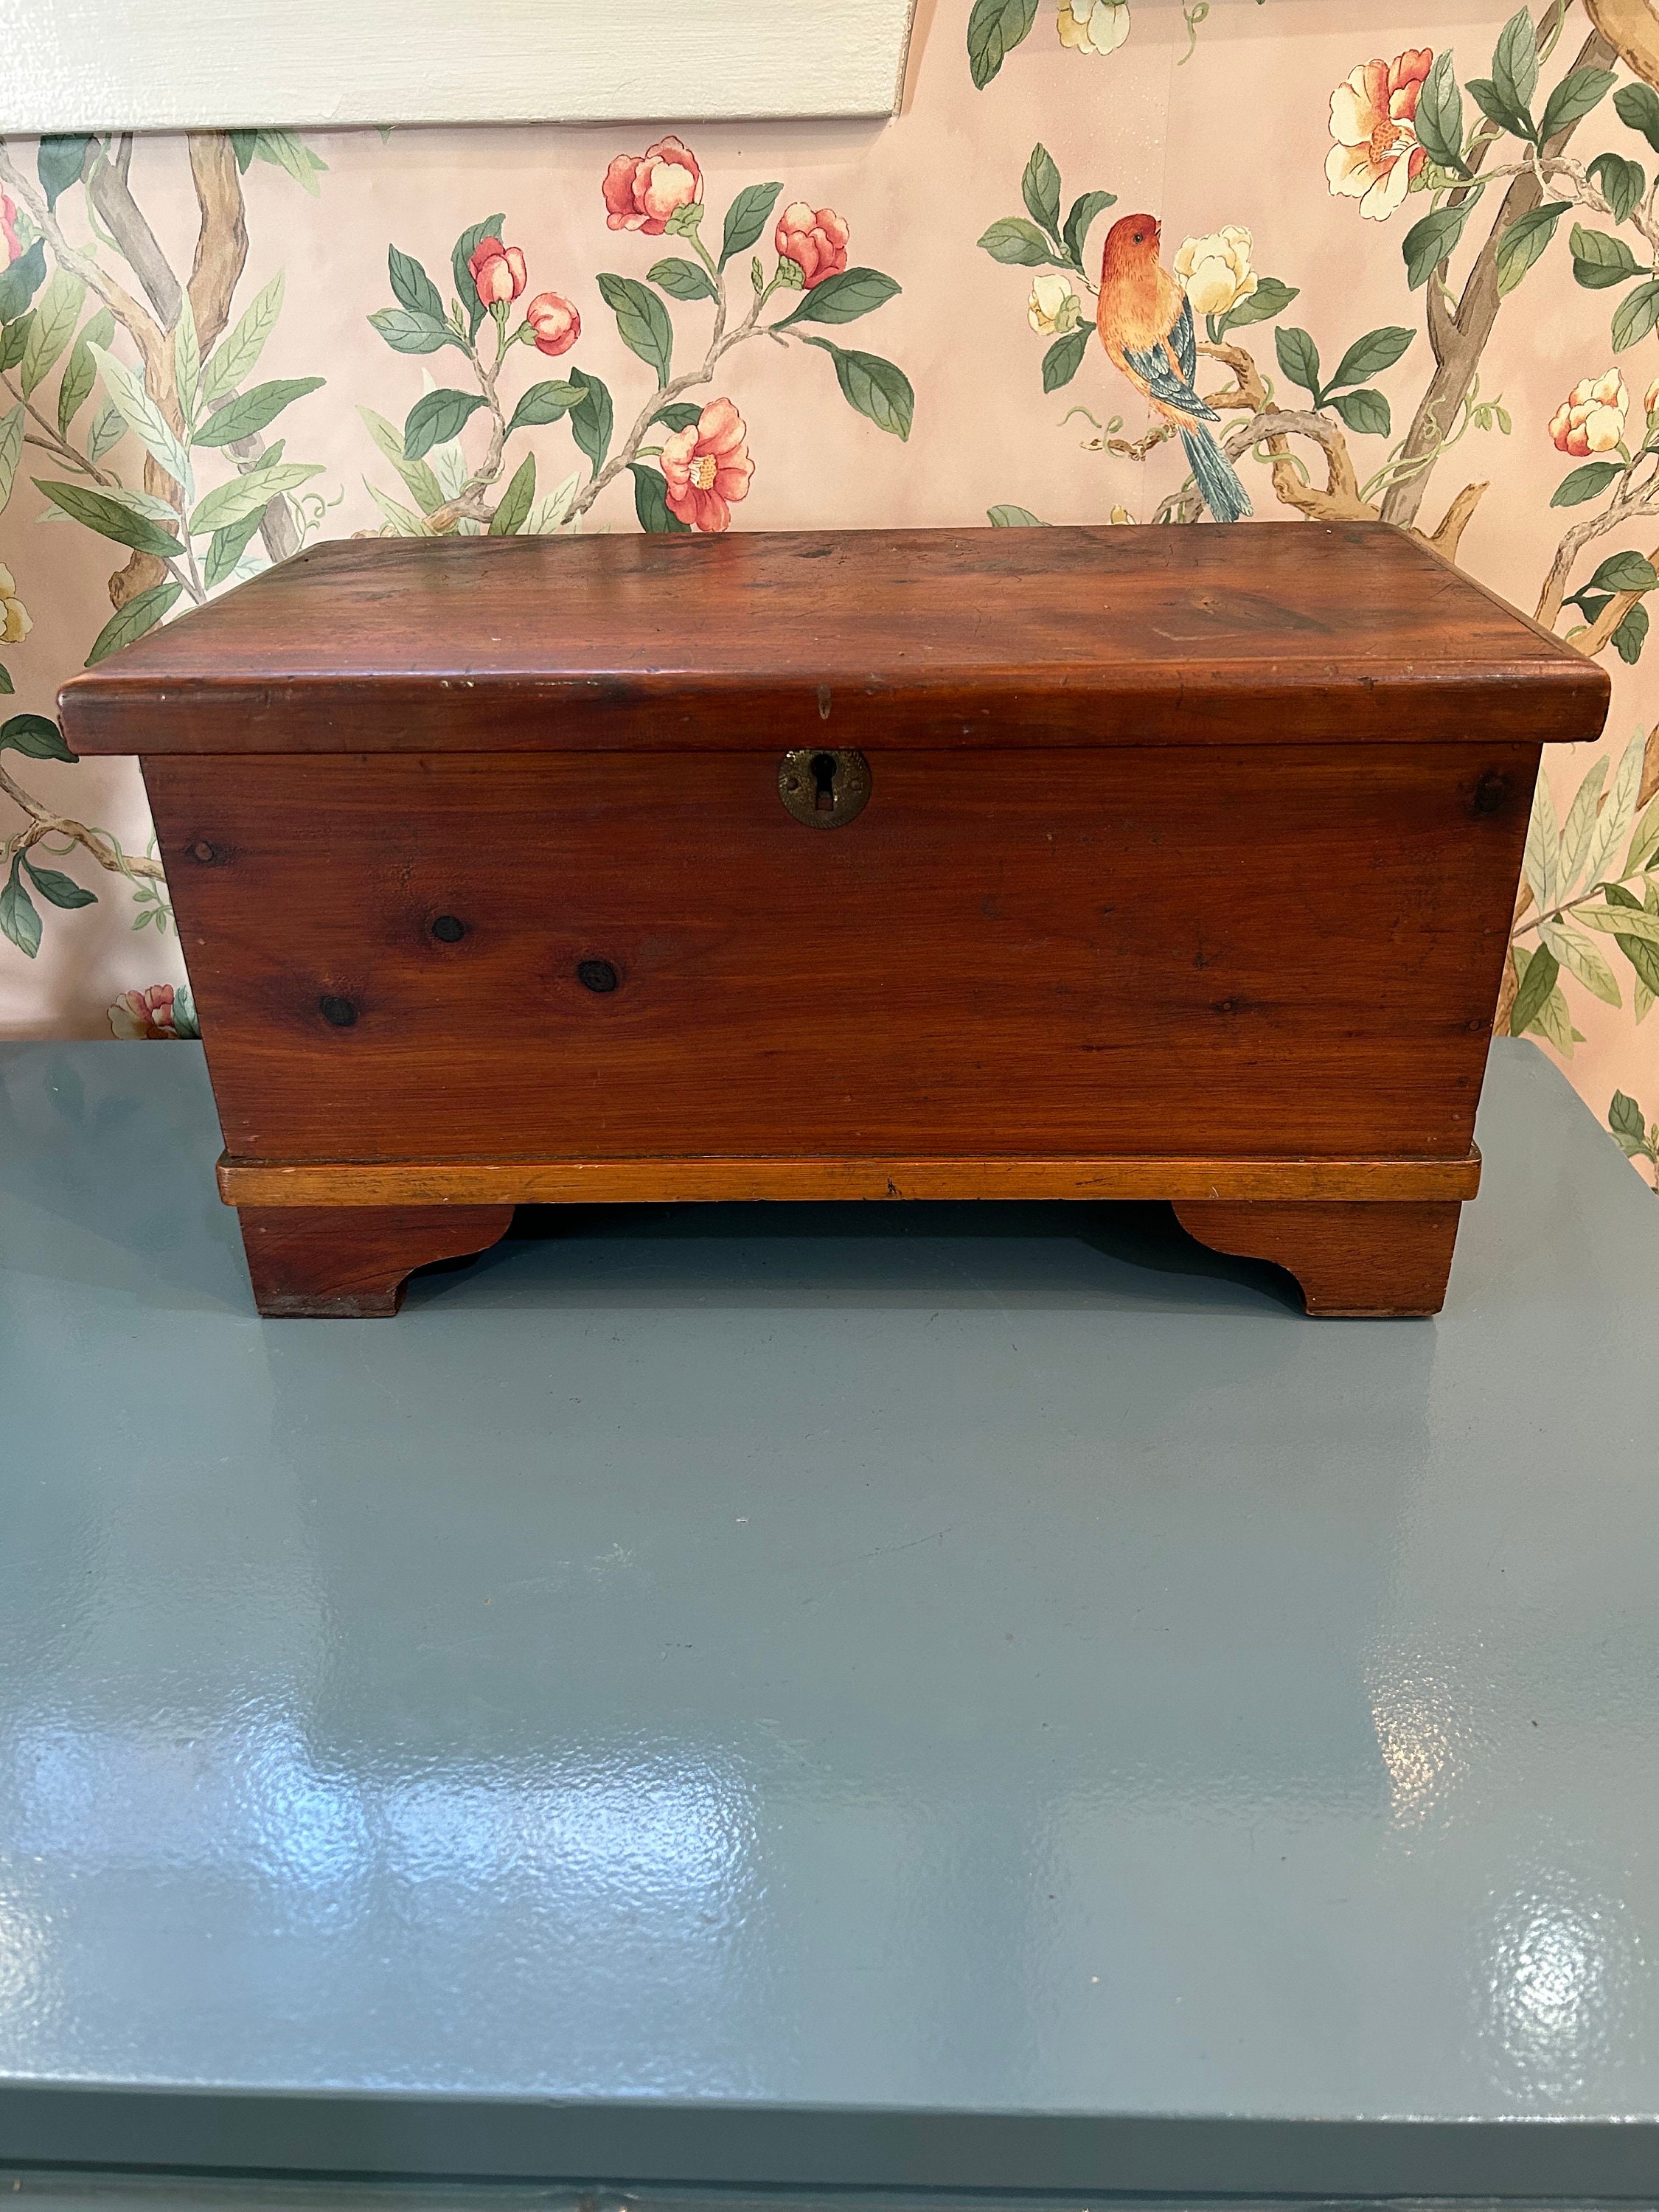 Small Cedar Hope Chest from DutchCrafters Amish Furniture